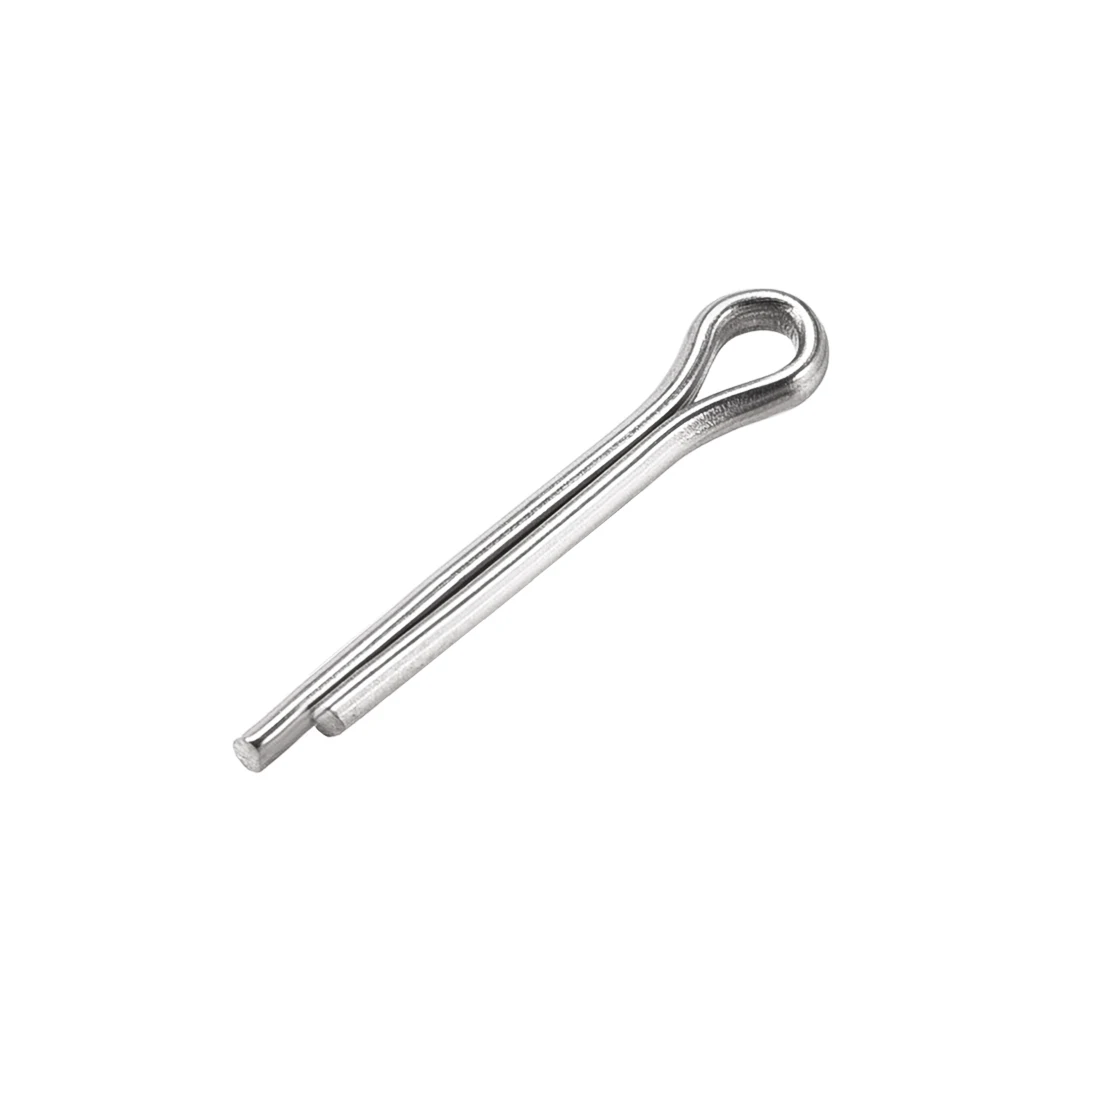 

uxcell 120Pcs Split Cotter Pin - 2mm x 12mm 304 Stainless Steel 2-Prongs Silver Tone for Secure Clevis Pins,Castle Nuts